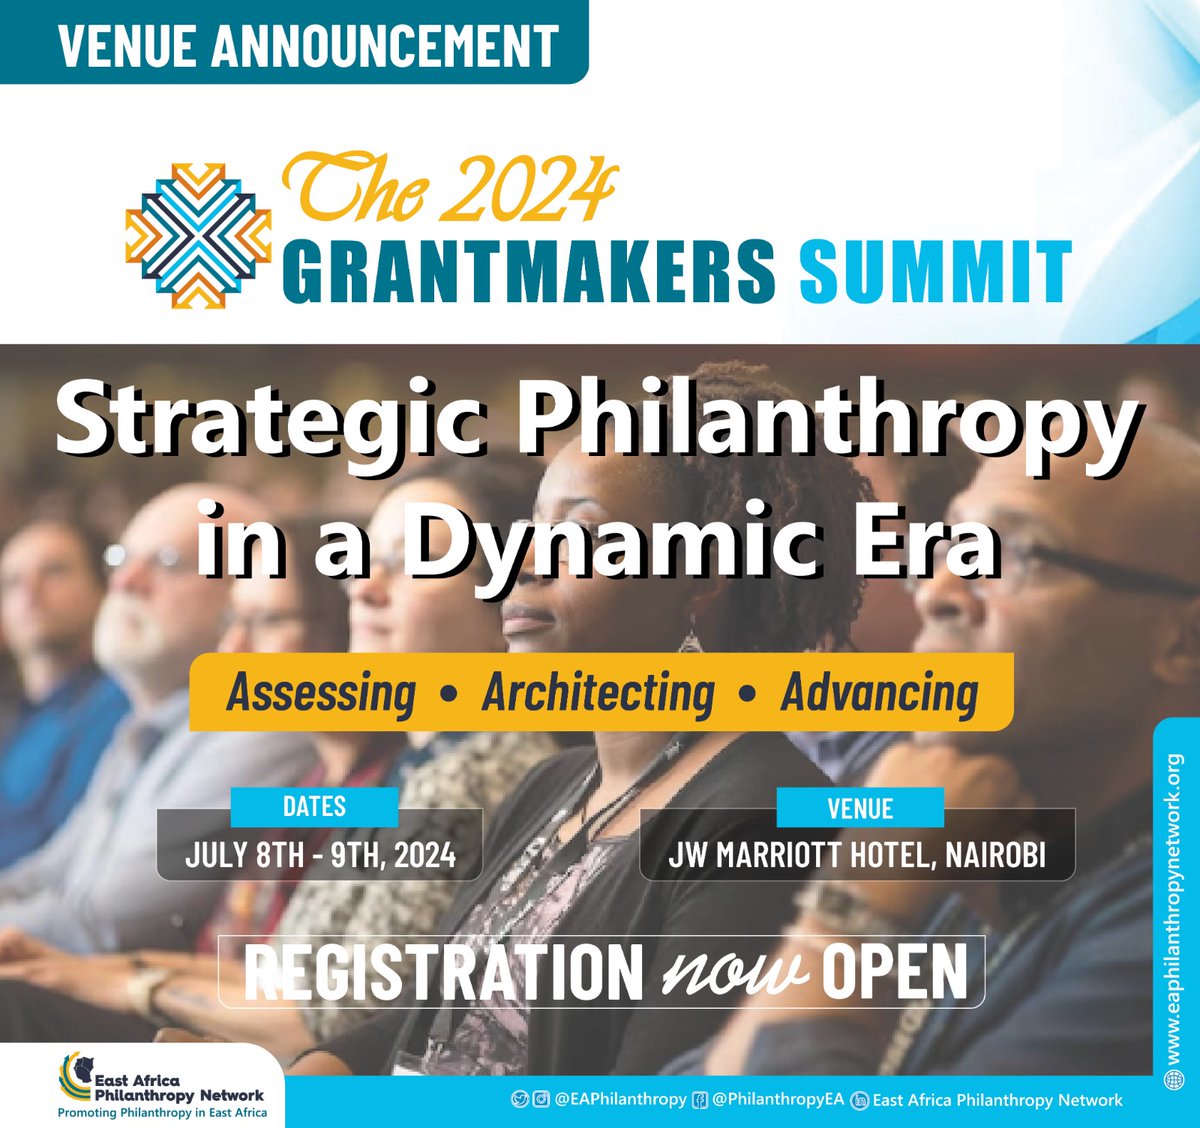 At the #2024GrantmakersSummit, @EAPhilanthropy is reimagining #philanthropy to address the polycrisis. From discussions on trust-based grantmaking to systemic reforms, the summit will be an opportunity to collaborate towards advancing #SocialJustice. ow.ly/8nNE50RJxFP